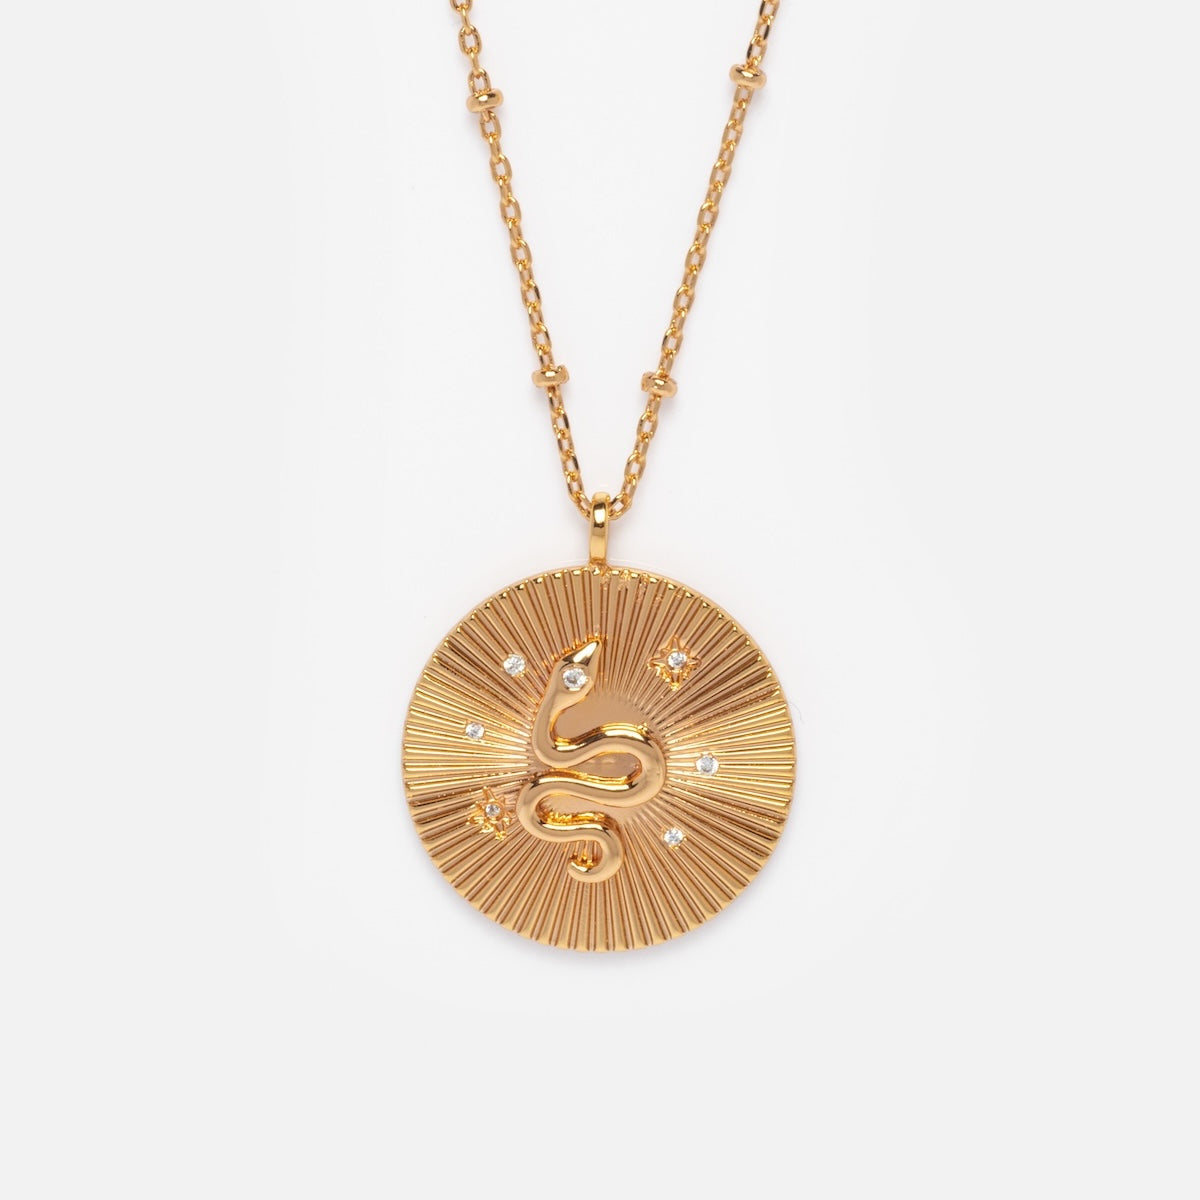 Mystic Serpent Coin Necklace